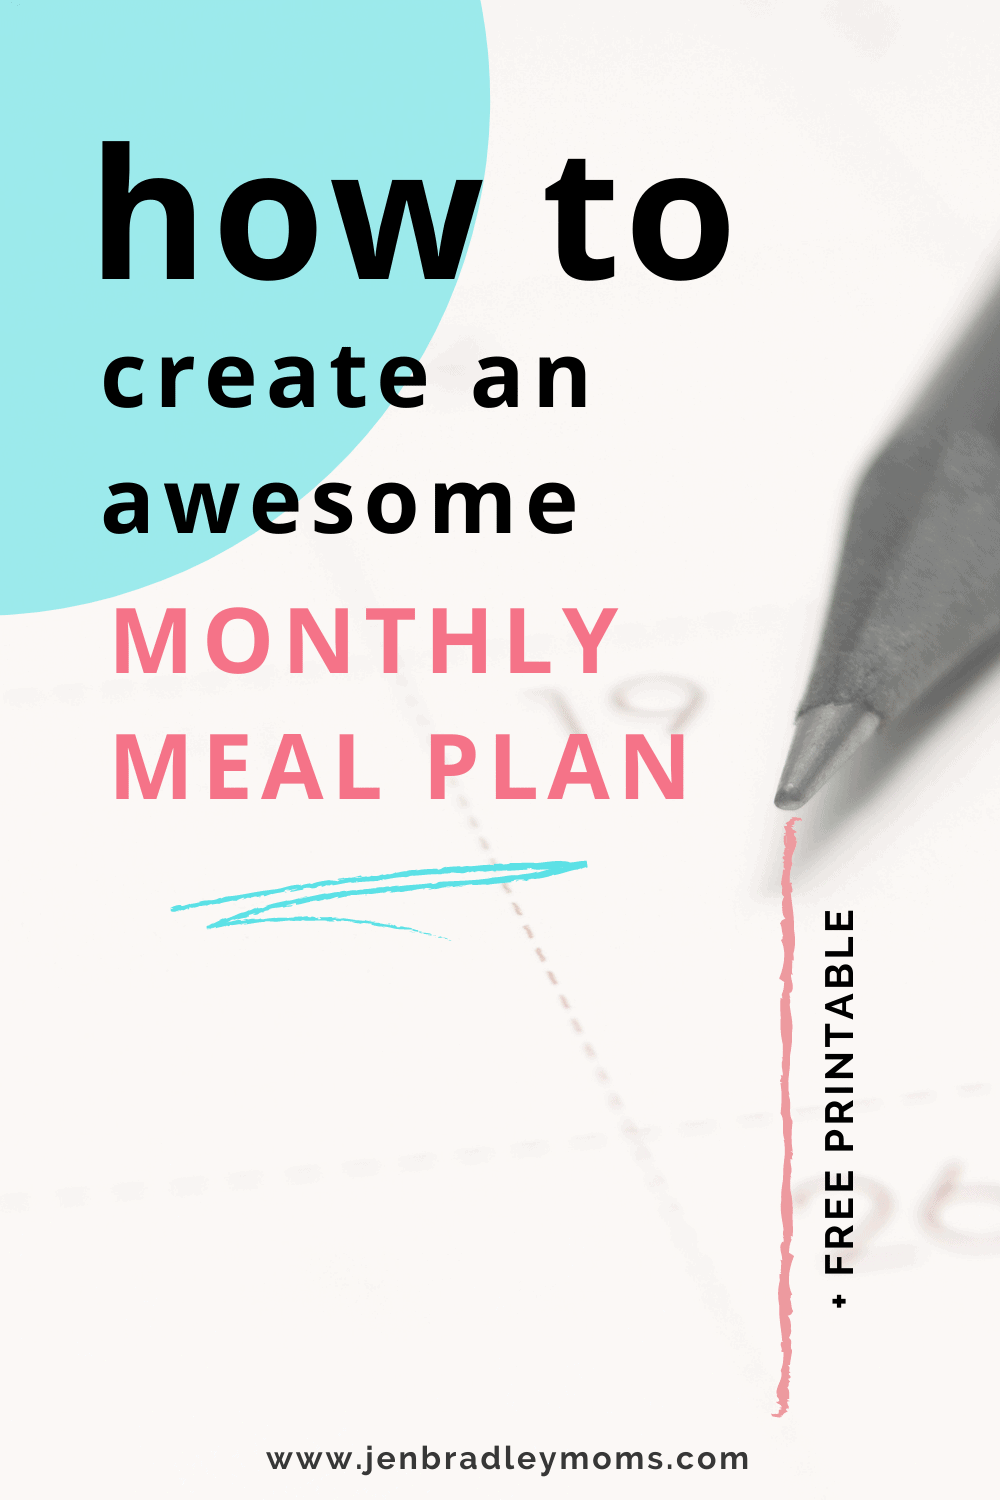 3 Easy Steps to Creating Your Amazing Monthly Meal Plan